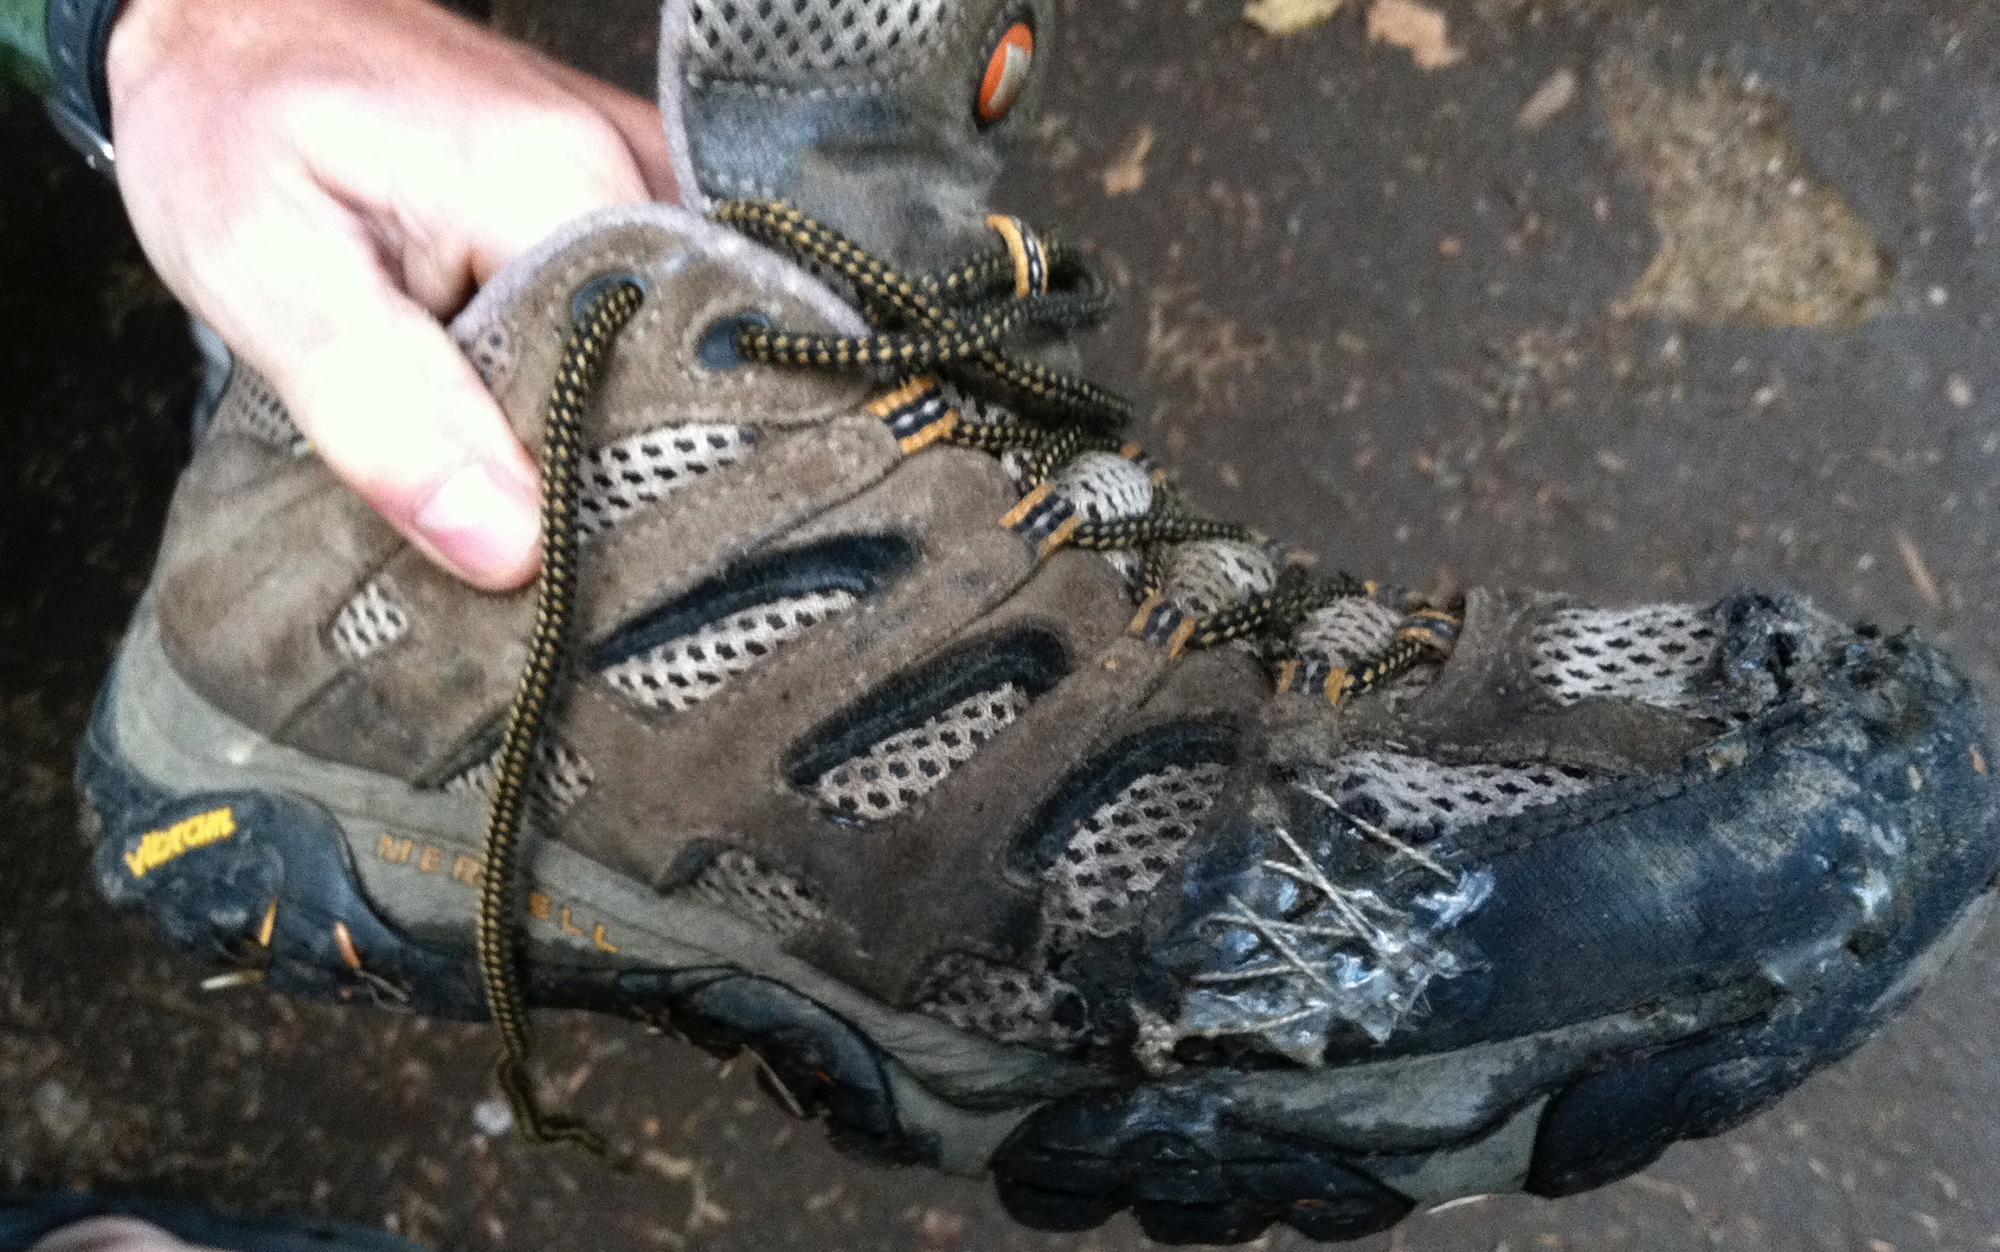 After 1,500 miles on the Appalachian Trail, it was finally time to replace this Merrell Moab men's hiking shoe.